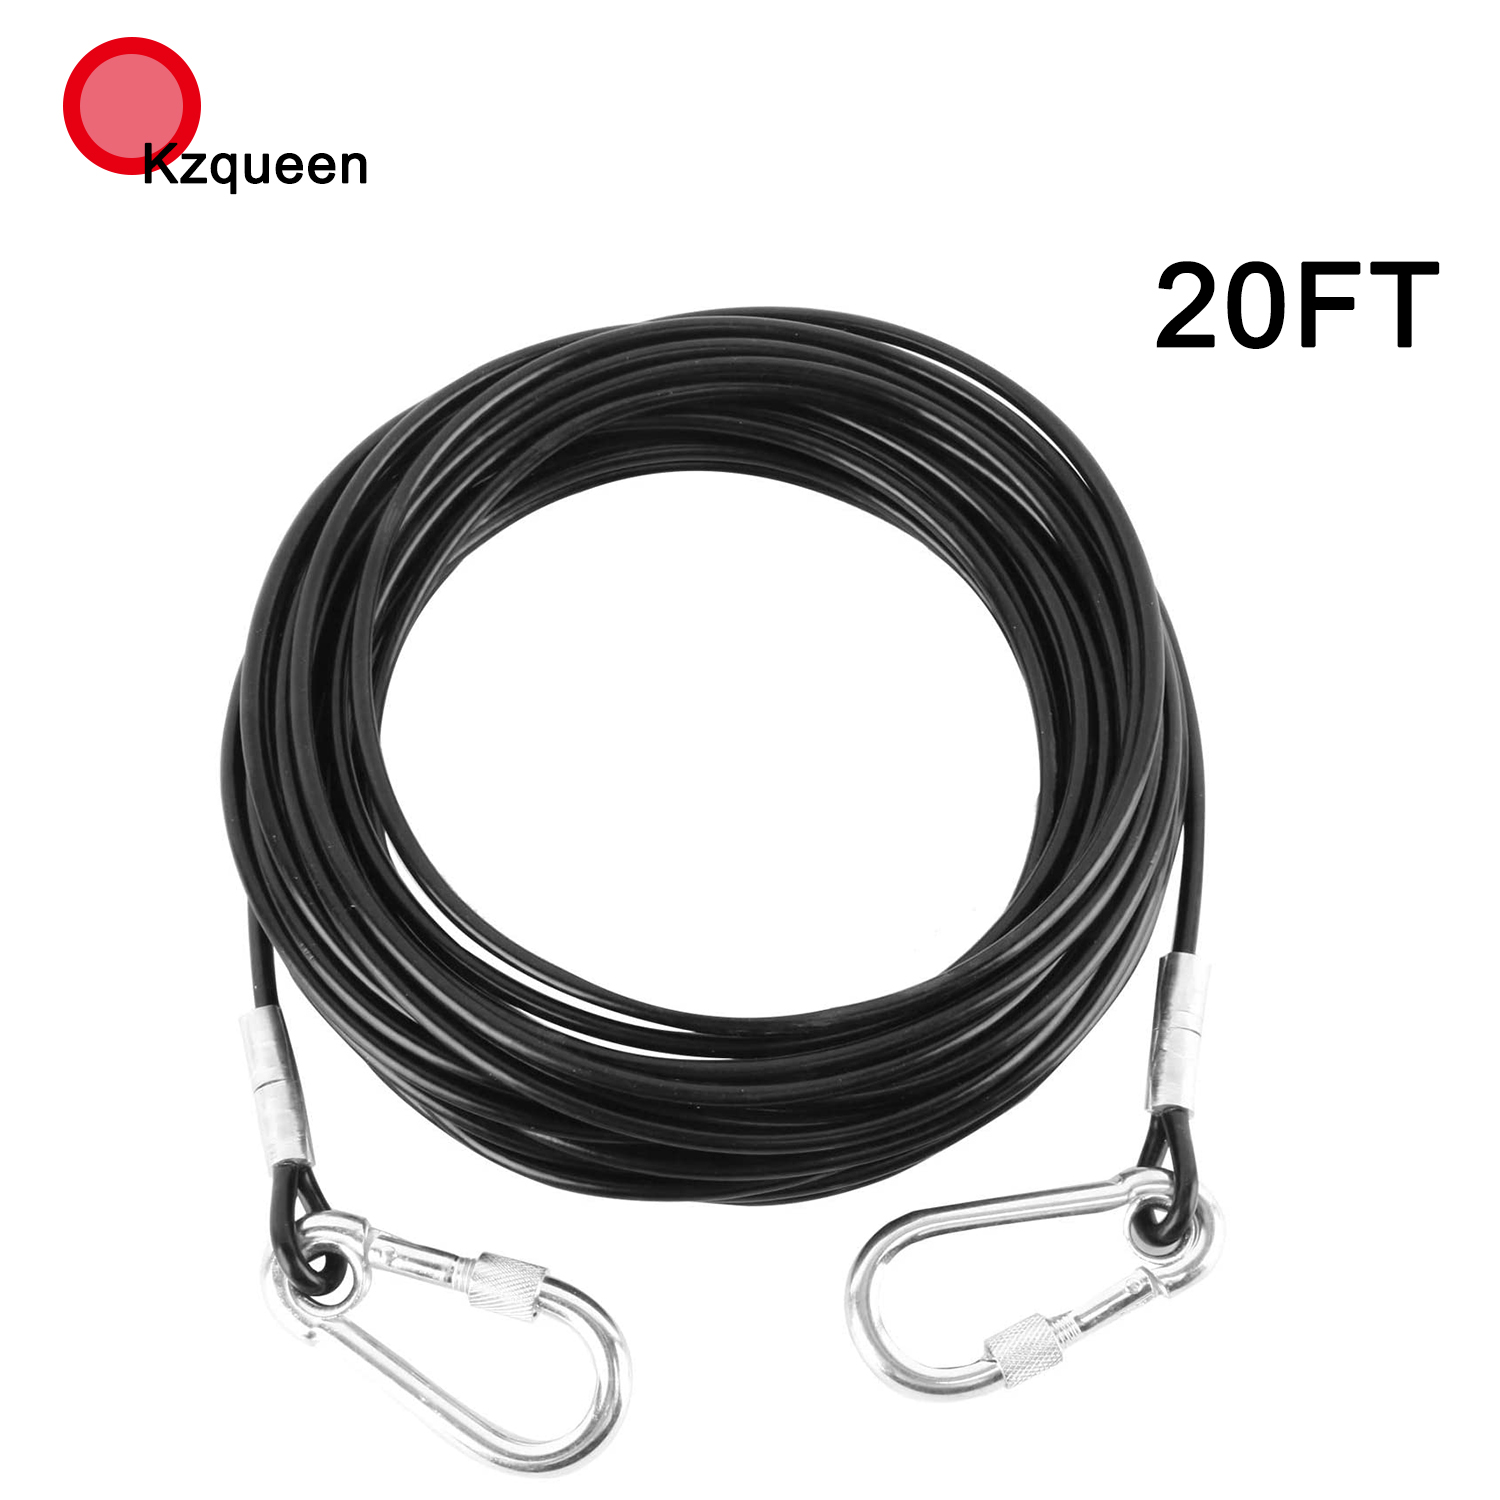 pet tie out cable